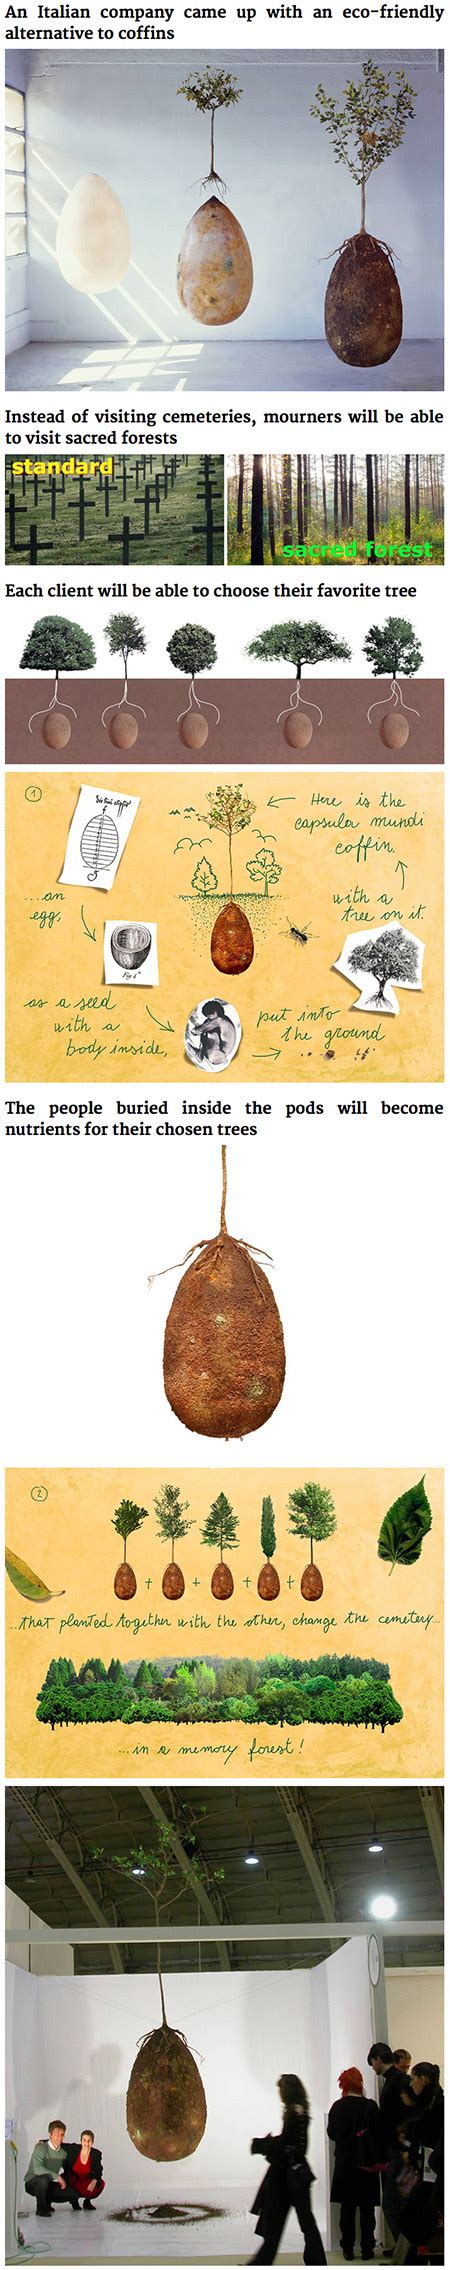 Capsula Mundi Burial Pods Will Turn Your Loved Ones Into Trees When They Die Techeblog